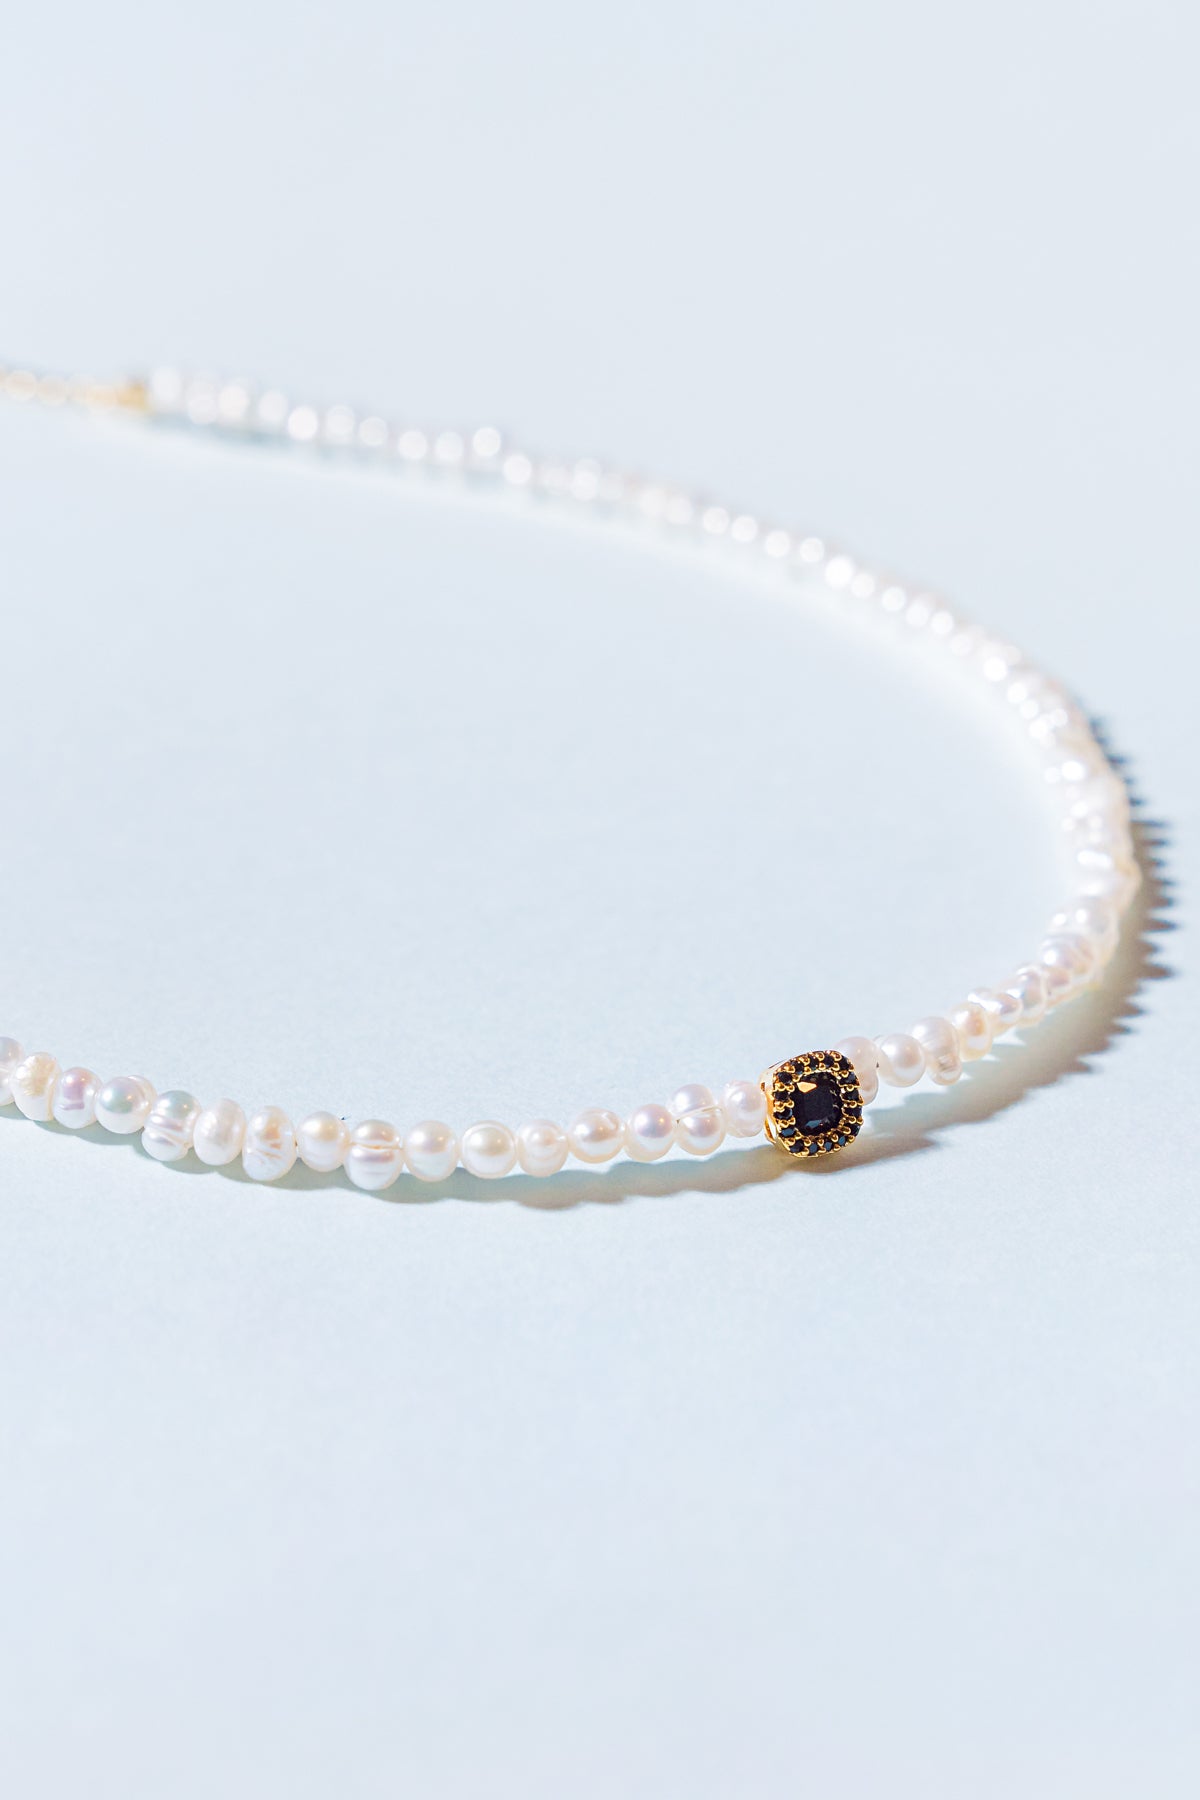 THE BOUNTY PEARL NECKLACE